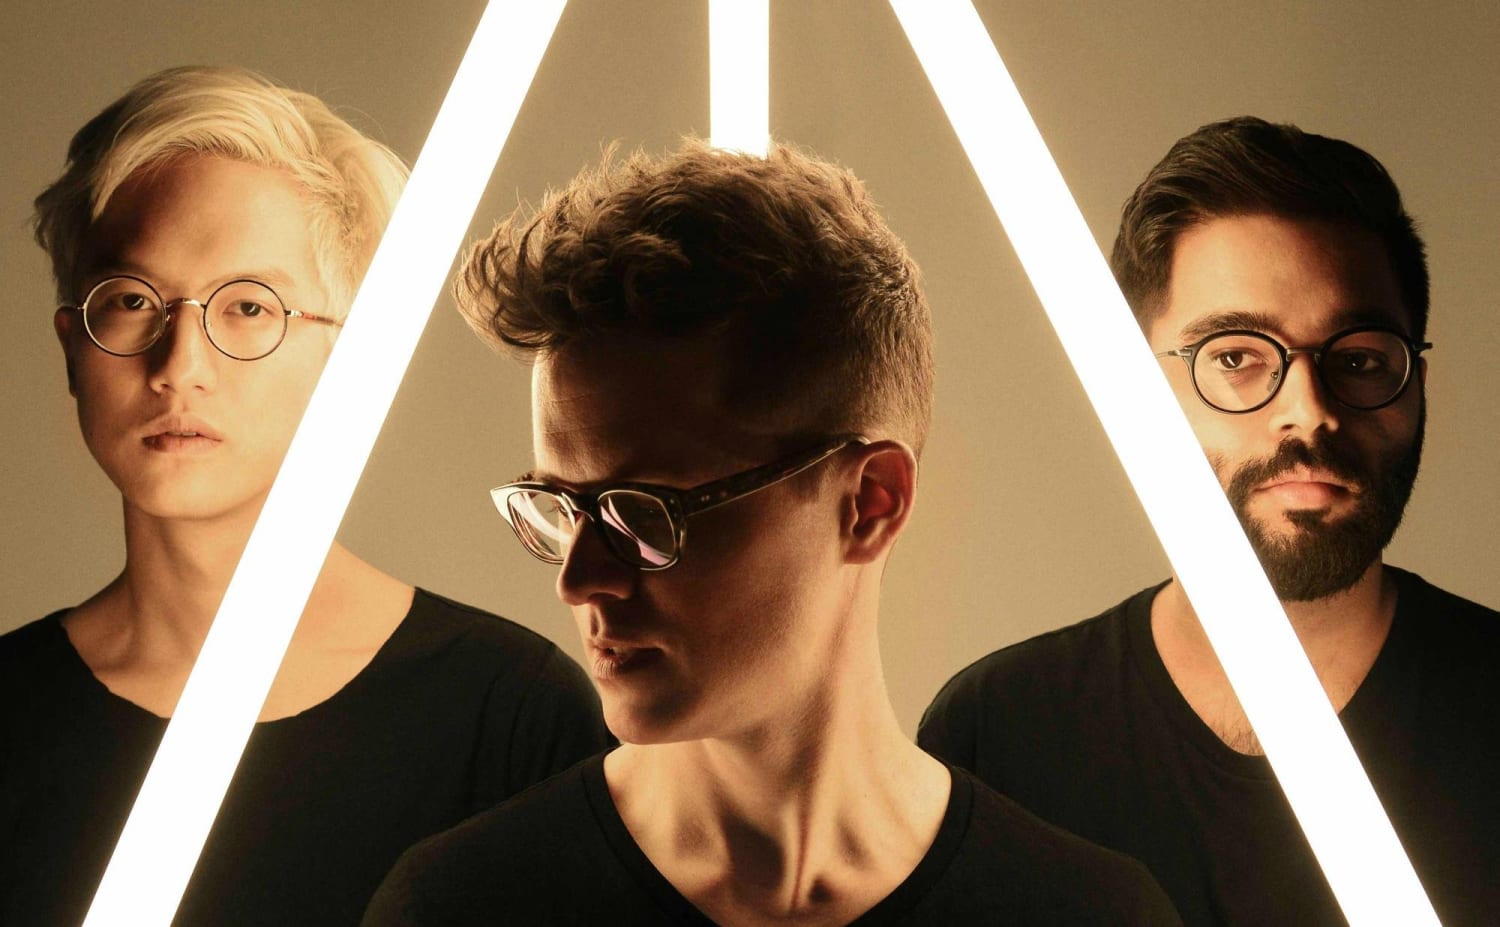 An exclusive mix from New York composer Son Lux